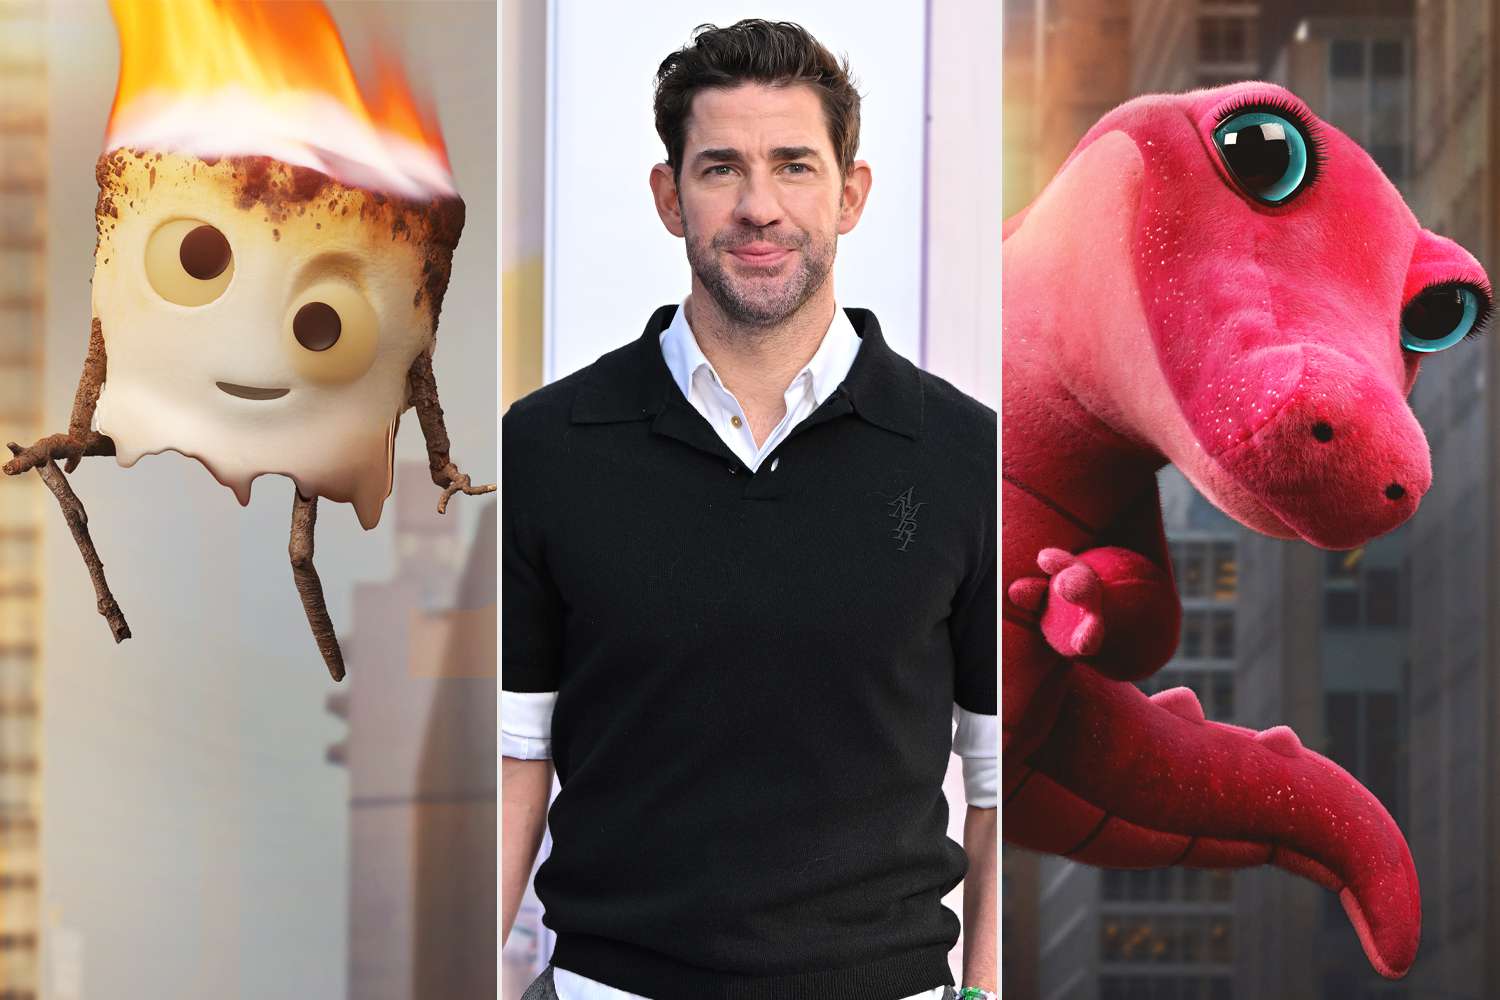 John Krasinski Shares How His Kids’ Imaginary Friends Inspired the Family Movie 'IF' (Exclusive)